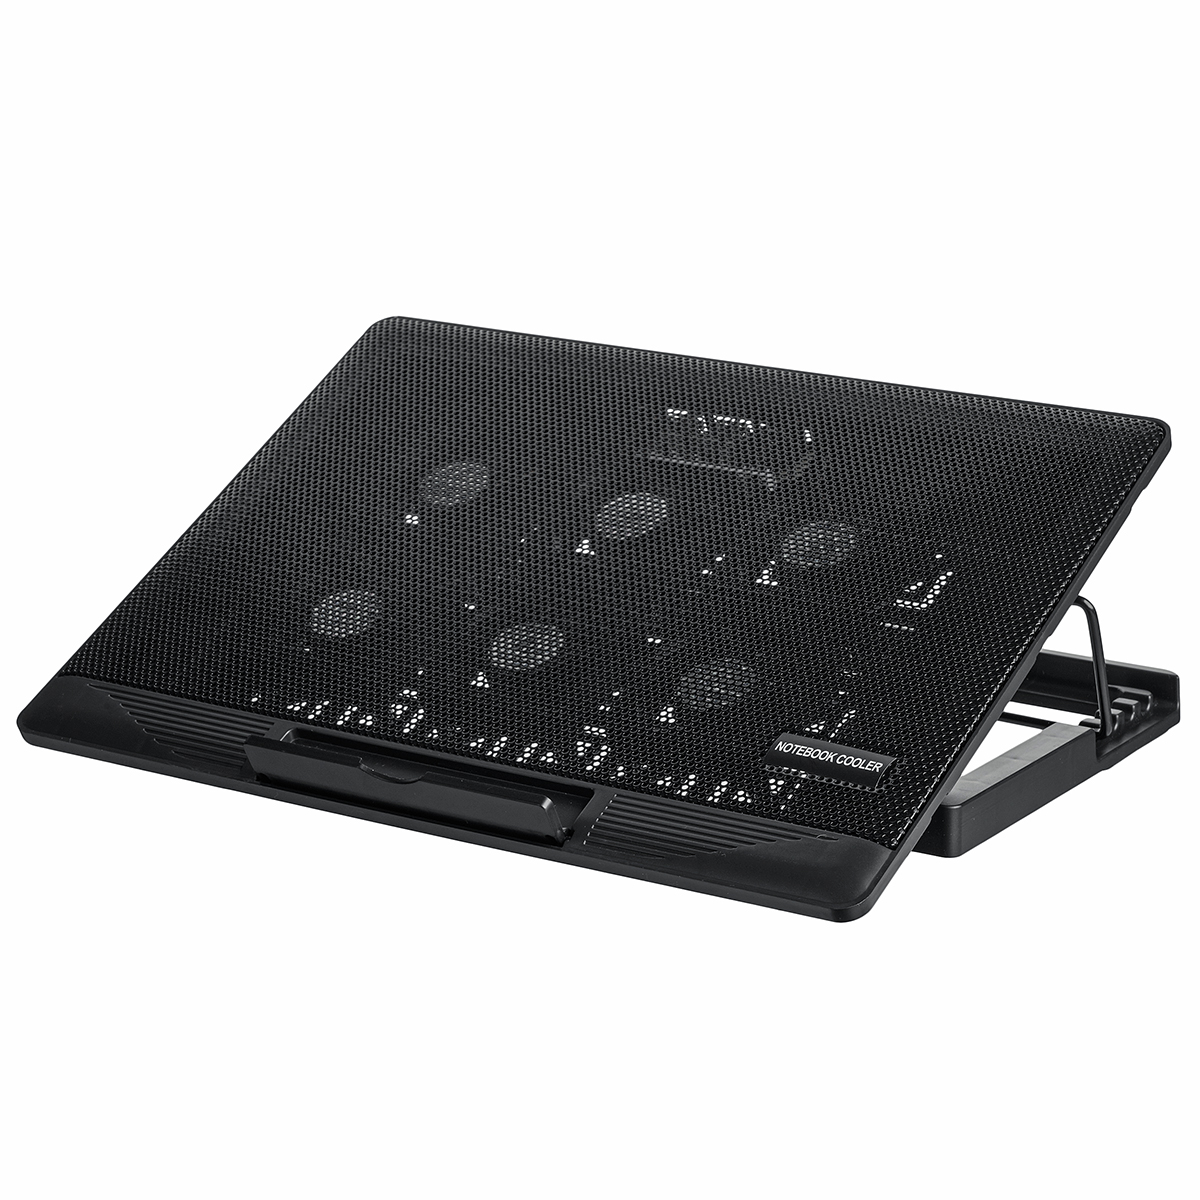 Find 6 Fan Adjustable Laptop Cooling Pad Cooler Portable Stand For 14 17inch Laptop for Sale on Gipsybee.com with cryptocurrencies